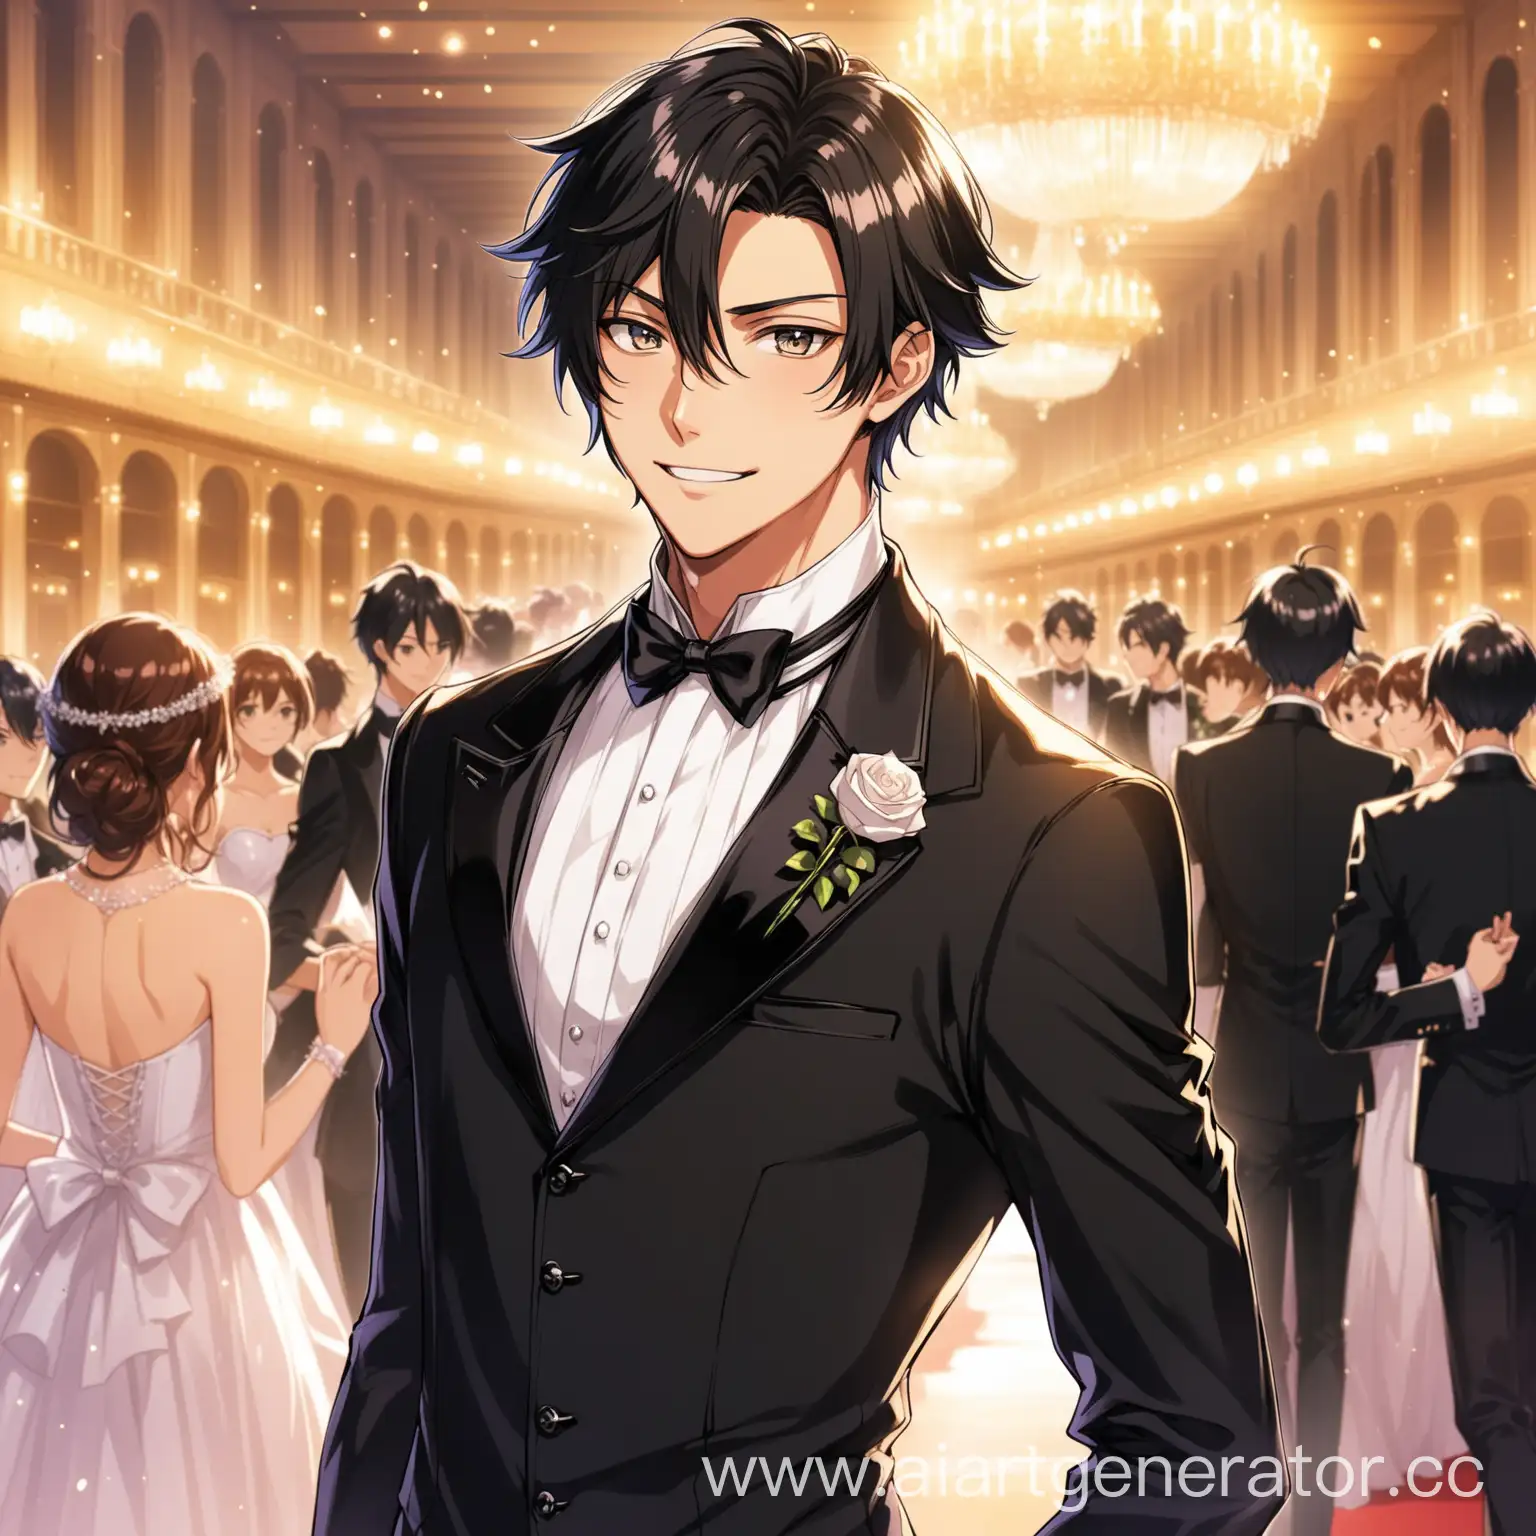 Elegant-Anime-Character-Attending-a-Grand-Ball-Event